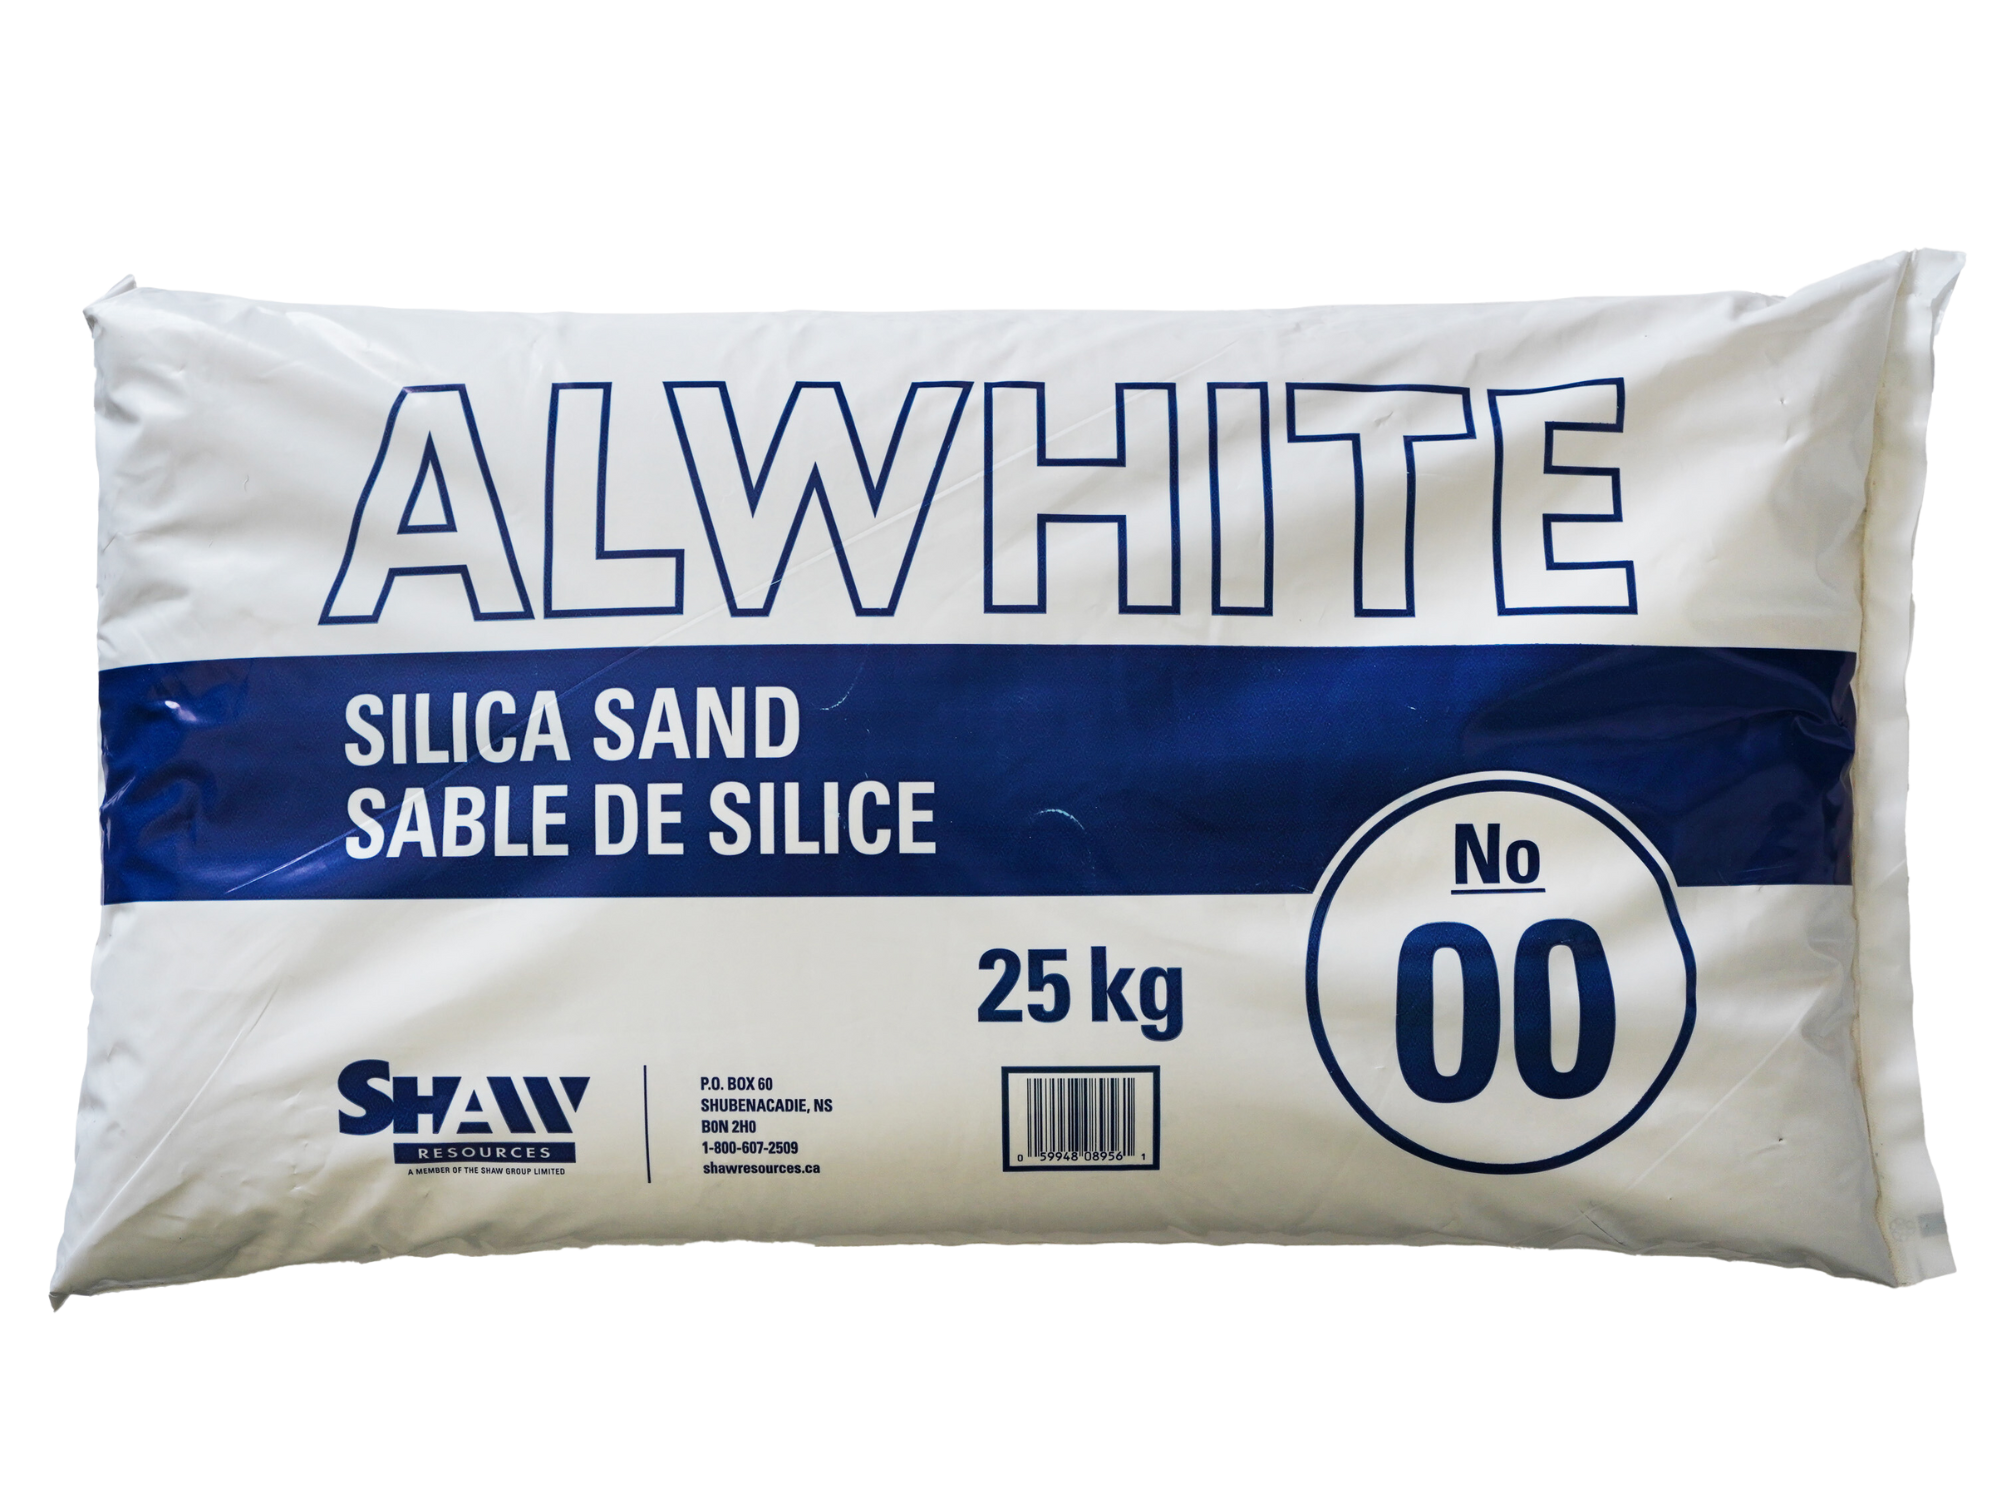 White Silica Sand 80lb Bags  George Townsend & Co., Inc. for all your  sandblasting, abrasive, and coating needs.